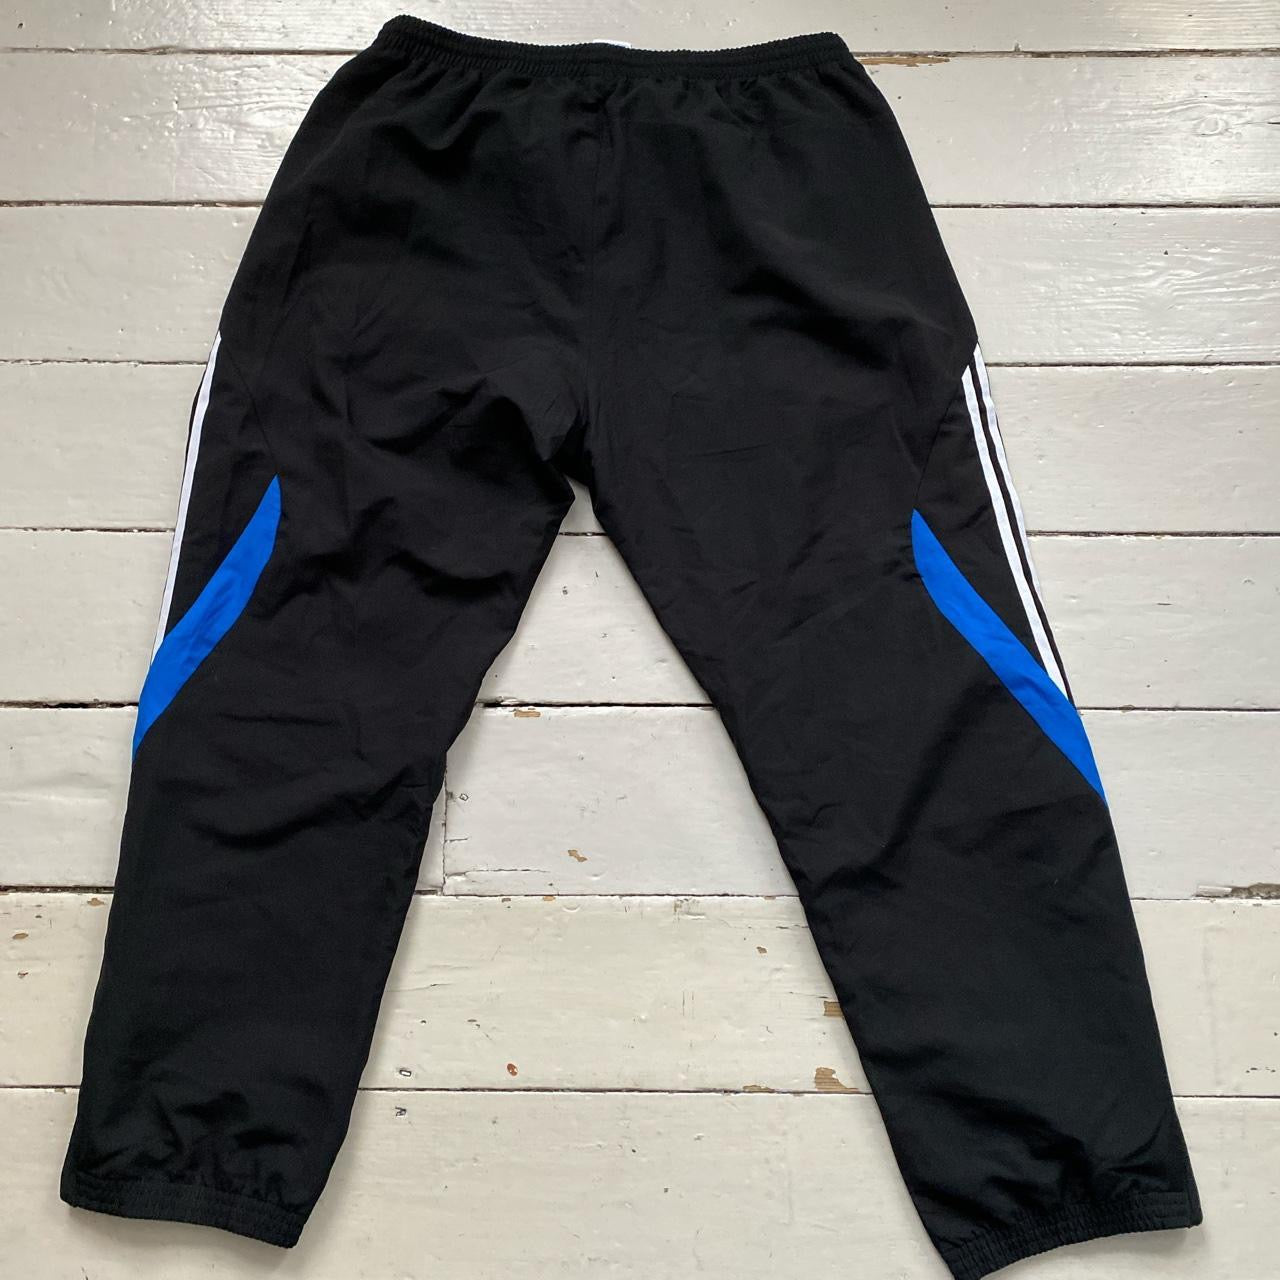 Adidas Black and Blue Shell Bottoms (XXL)